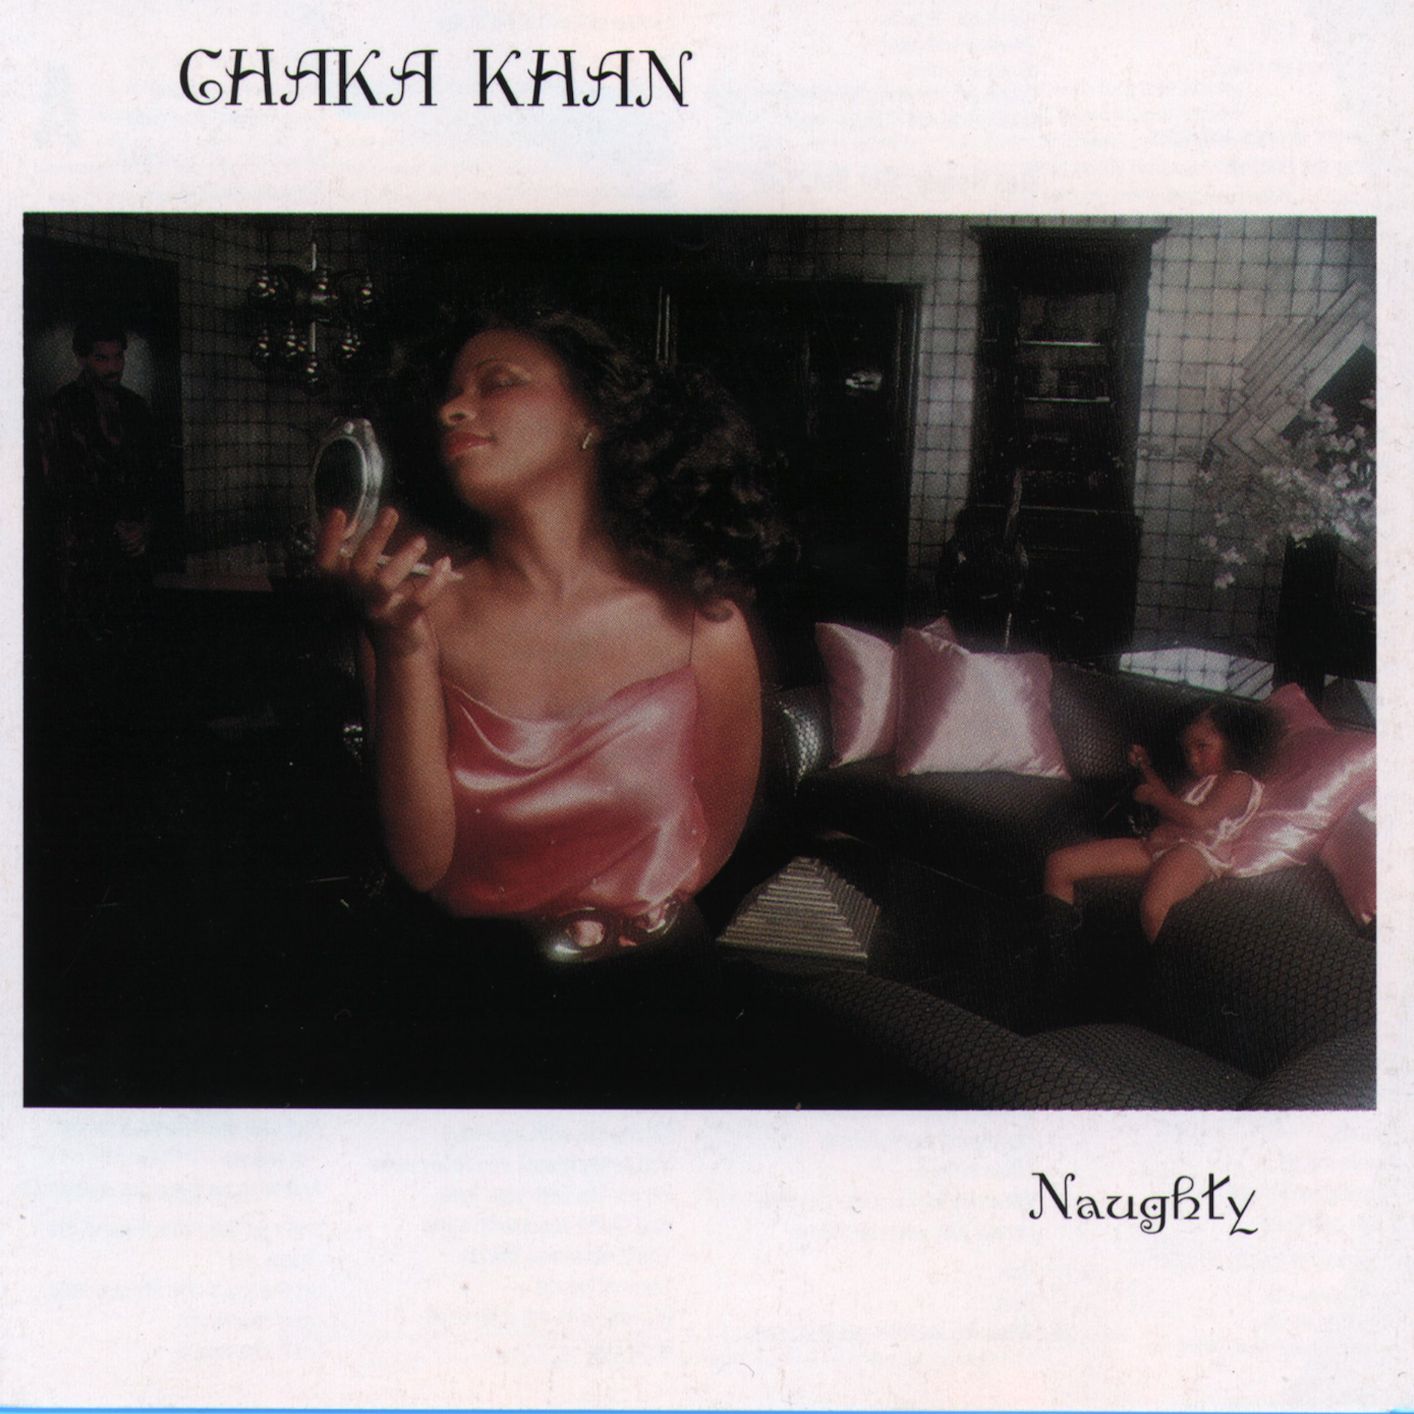 By the early '80s Chaka Khan and producer Arif Mardin had a great work...